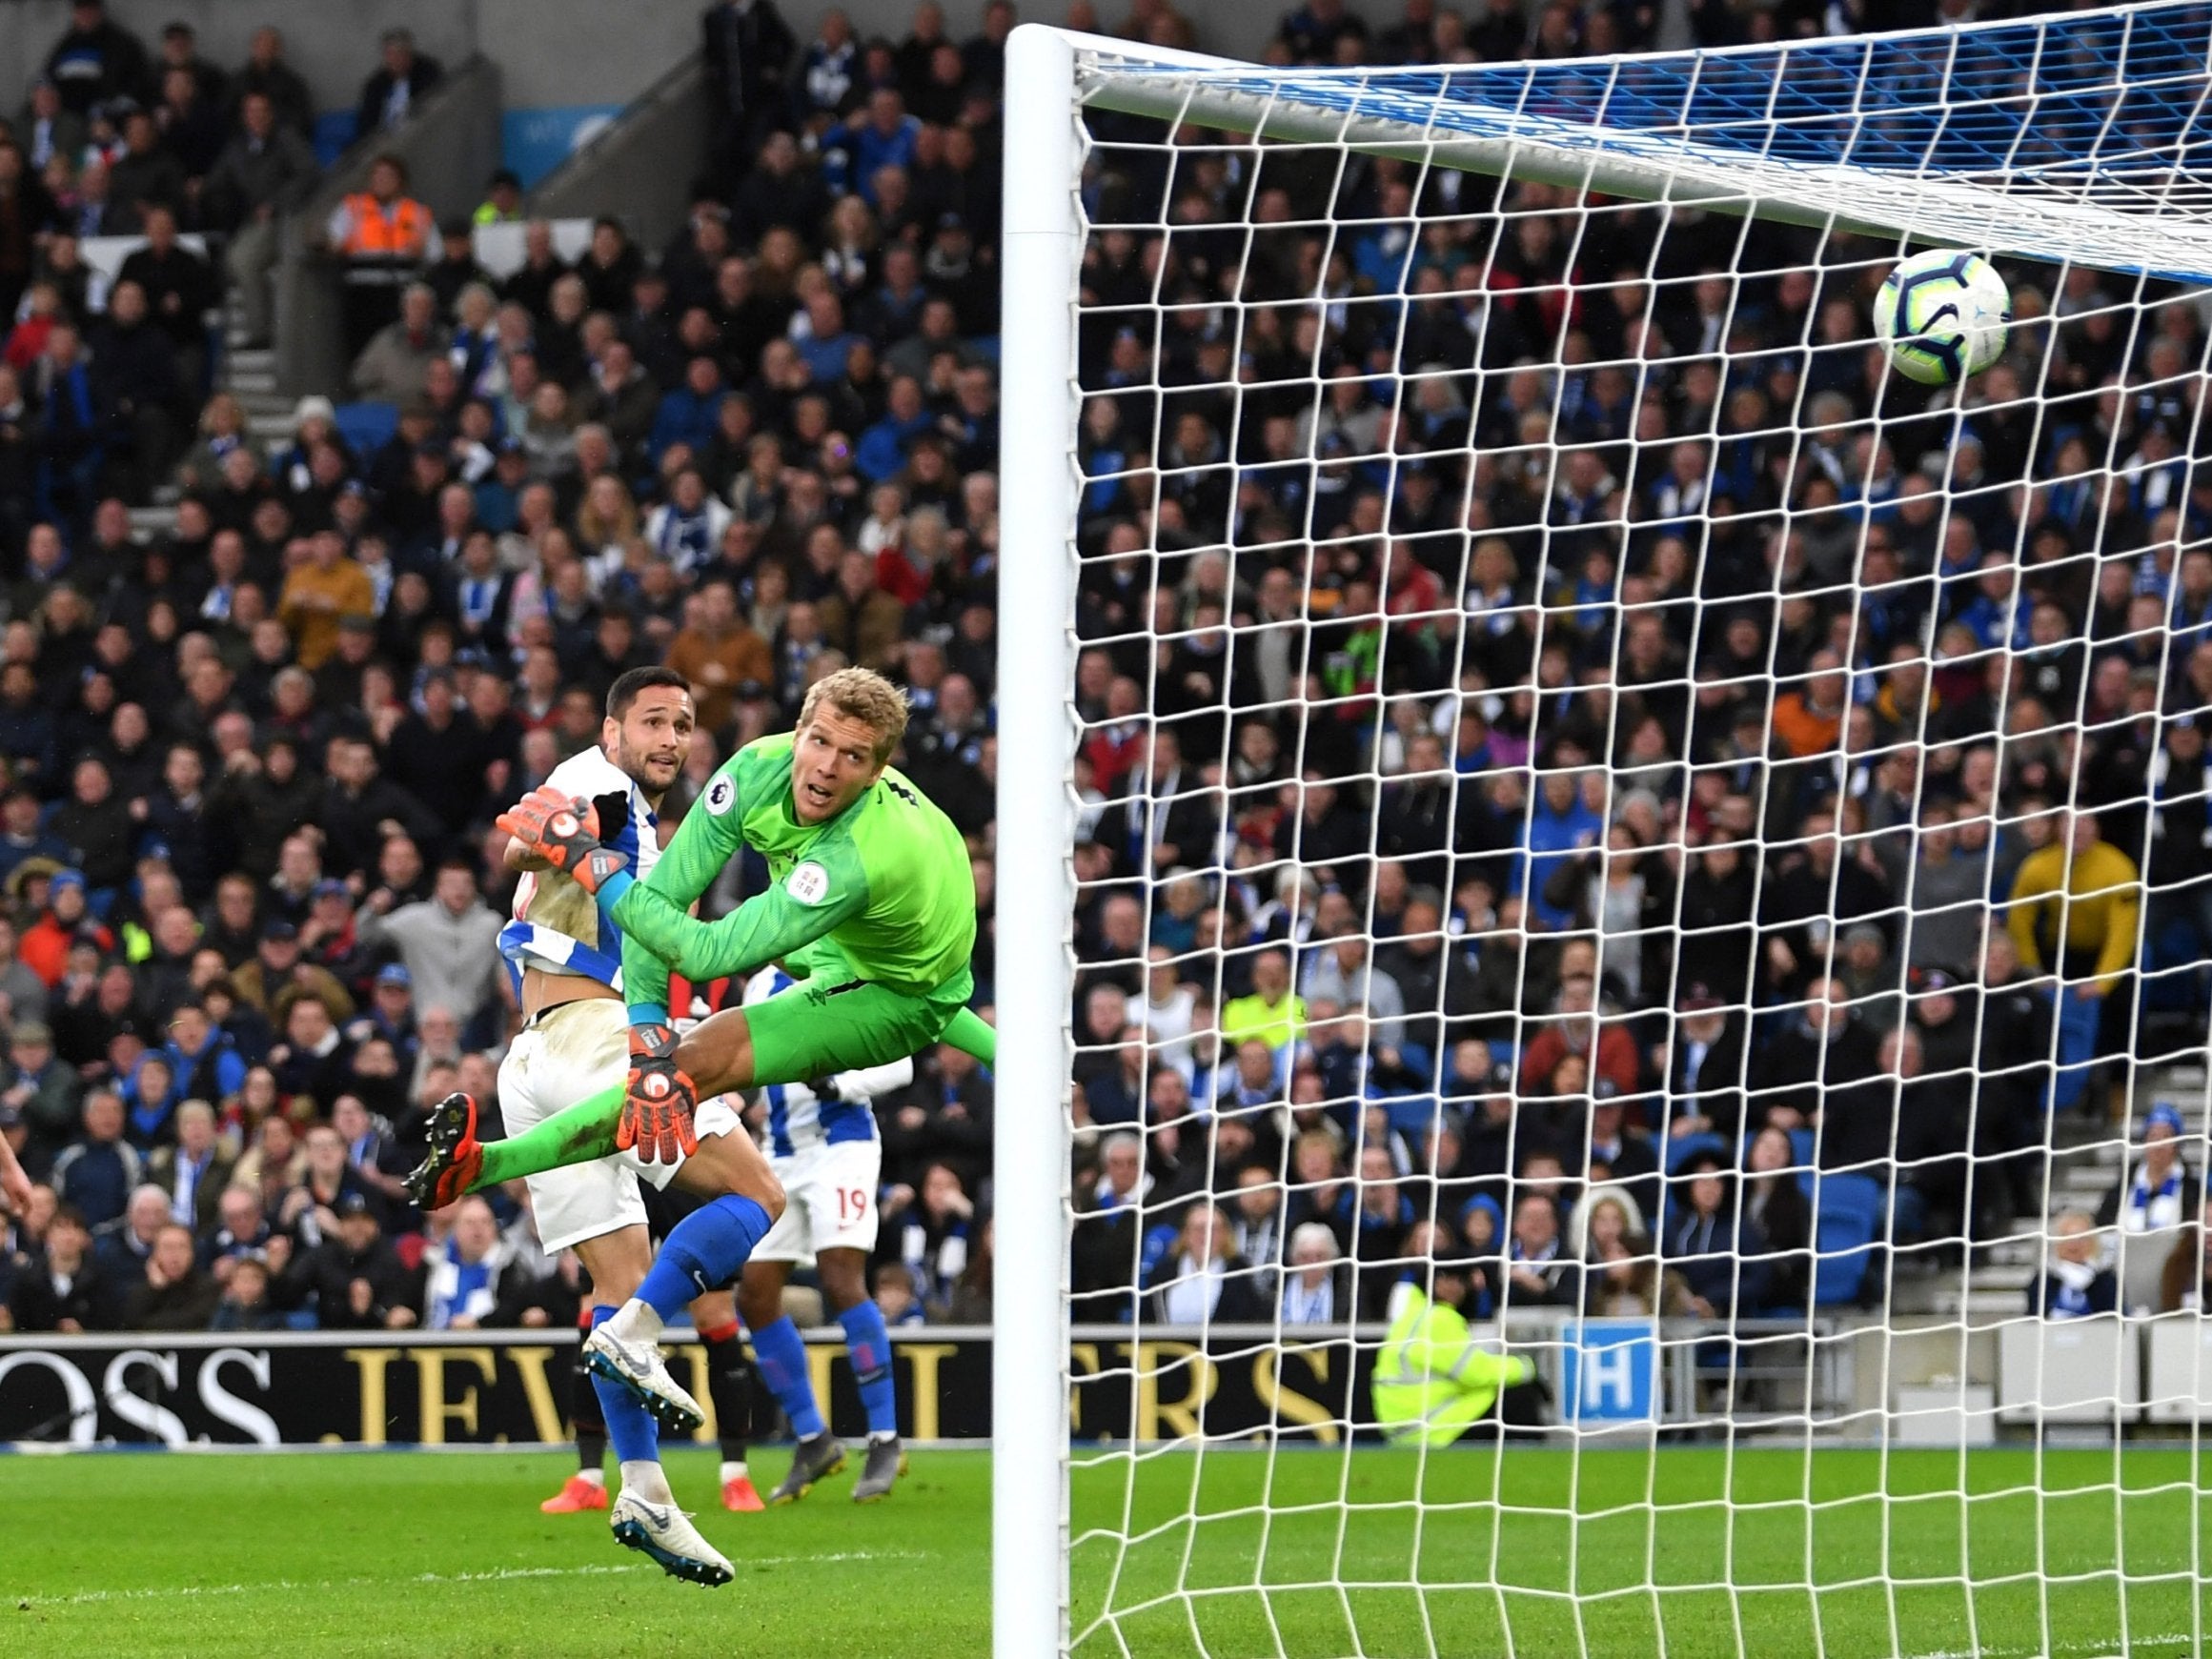 Florin Andone struck late on to give Brighton all three points